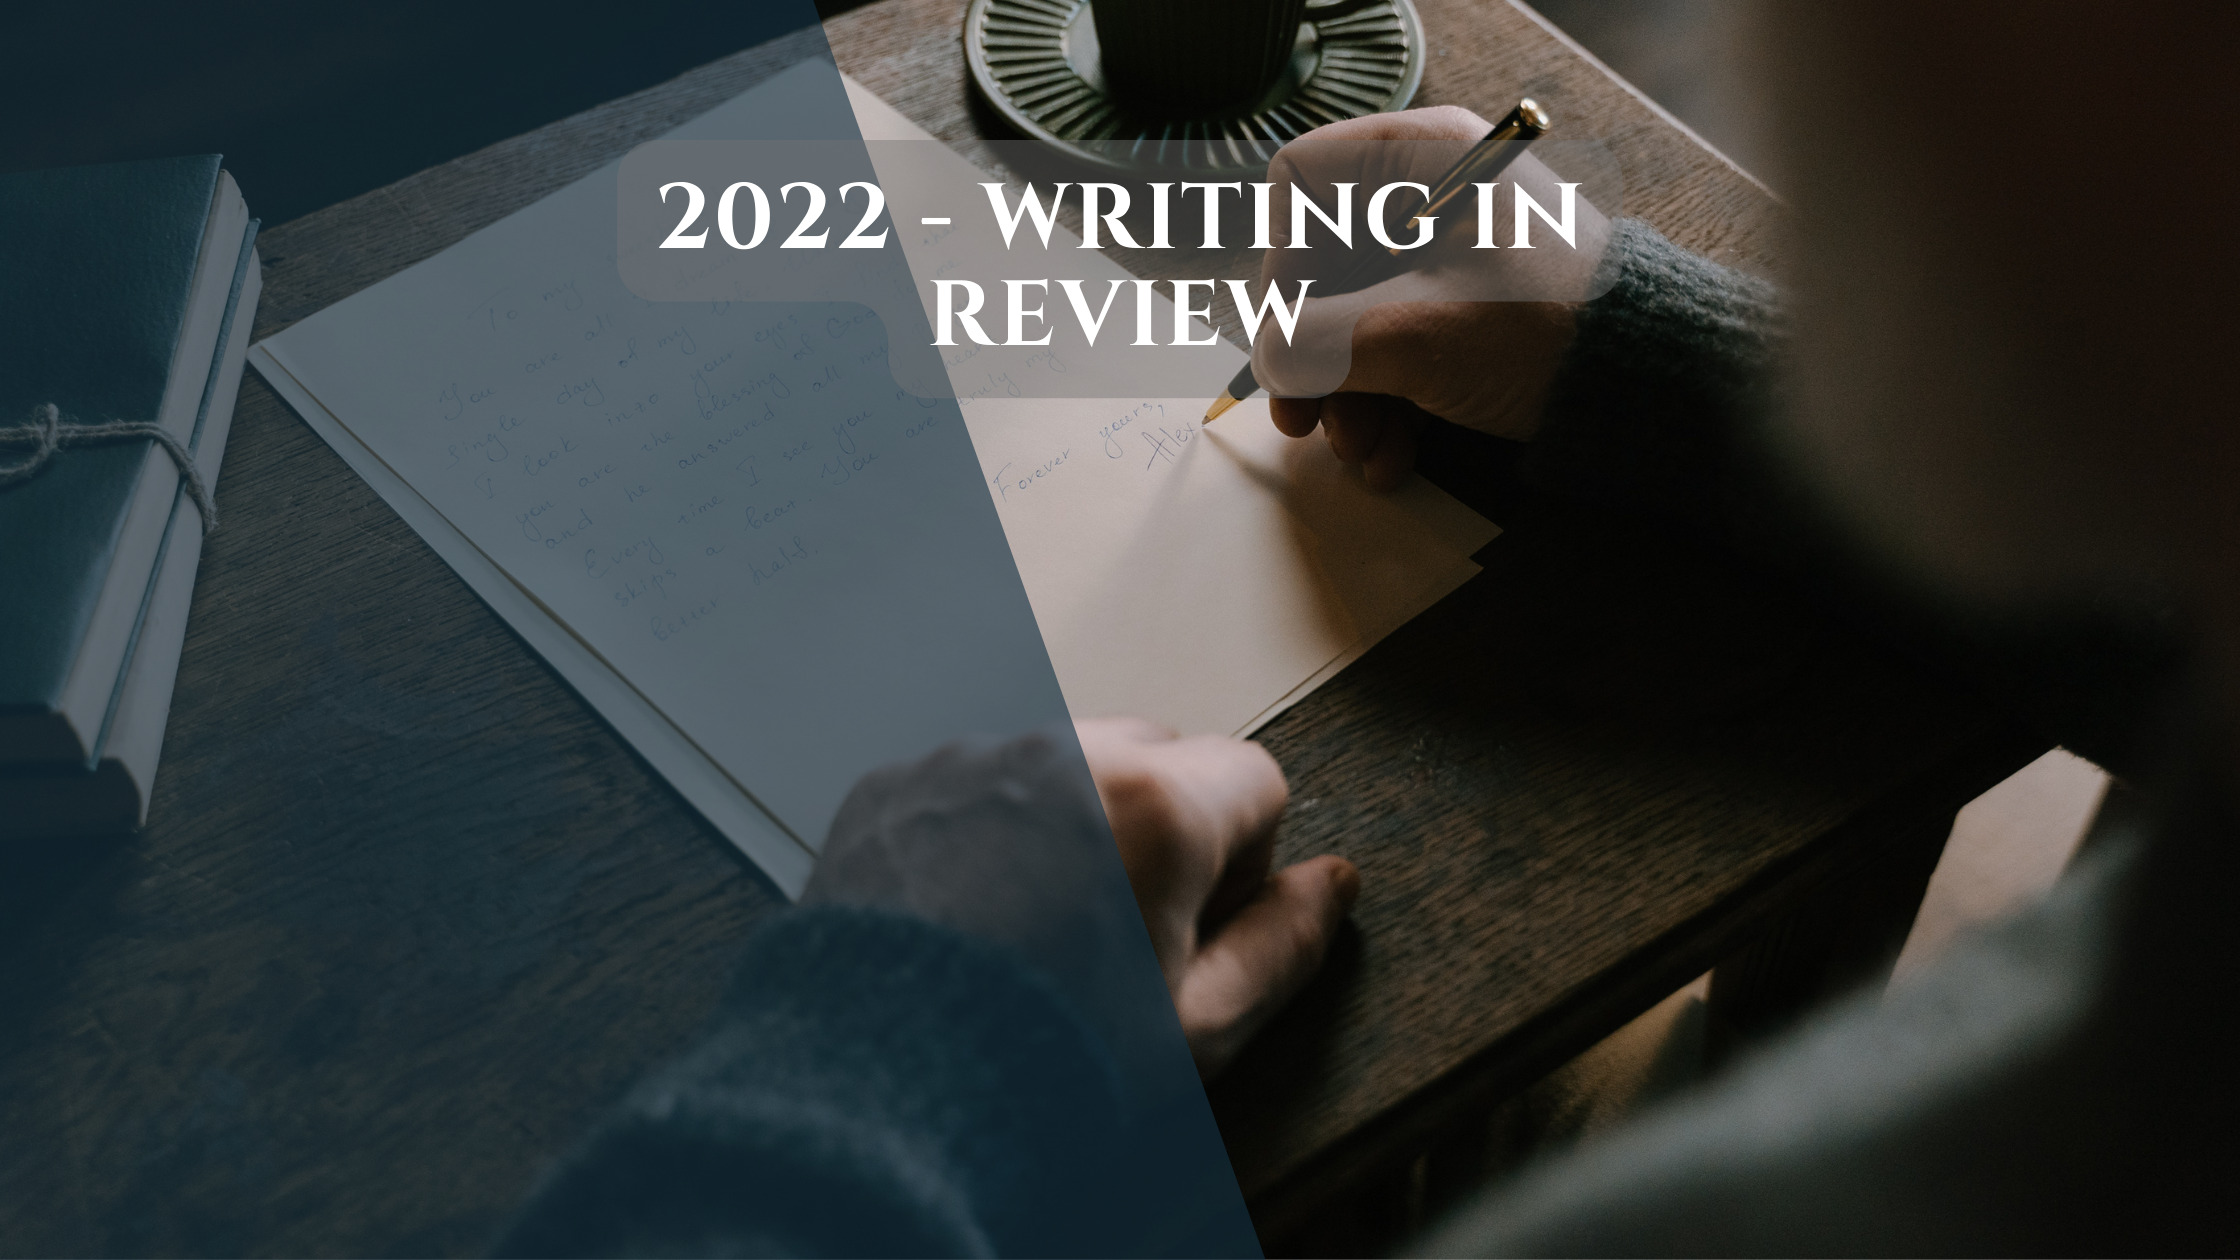 2022 - Writing in Review